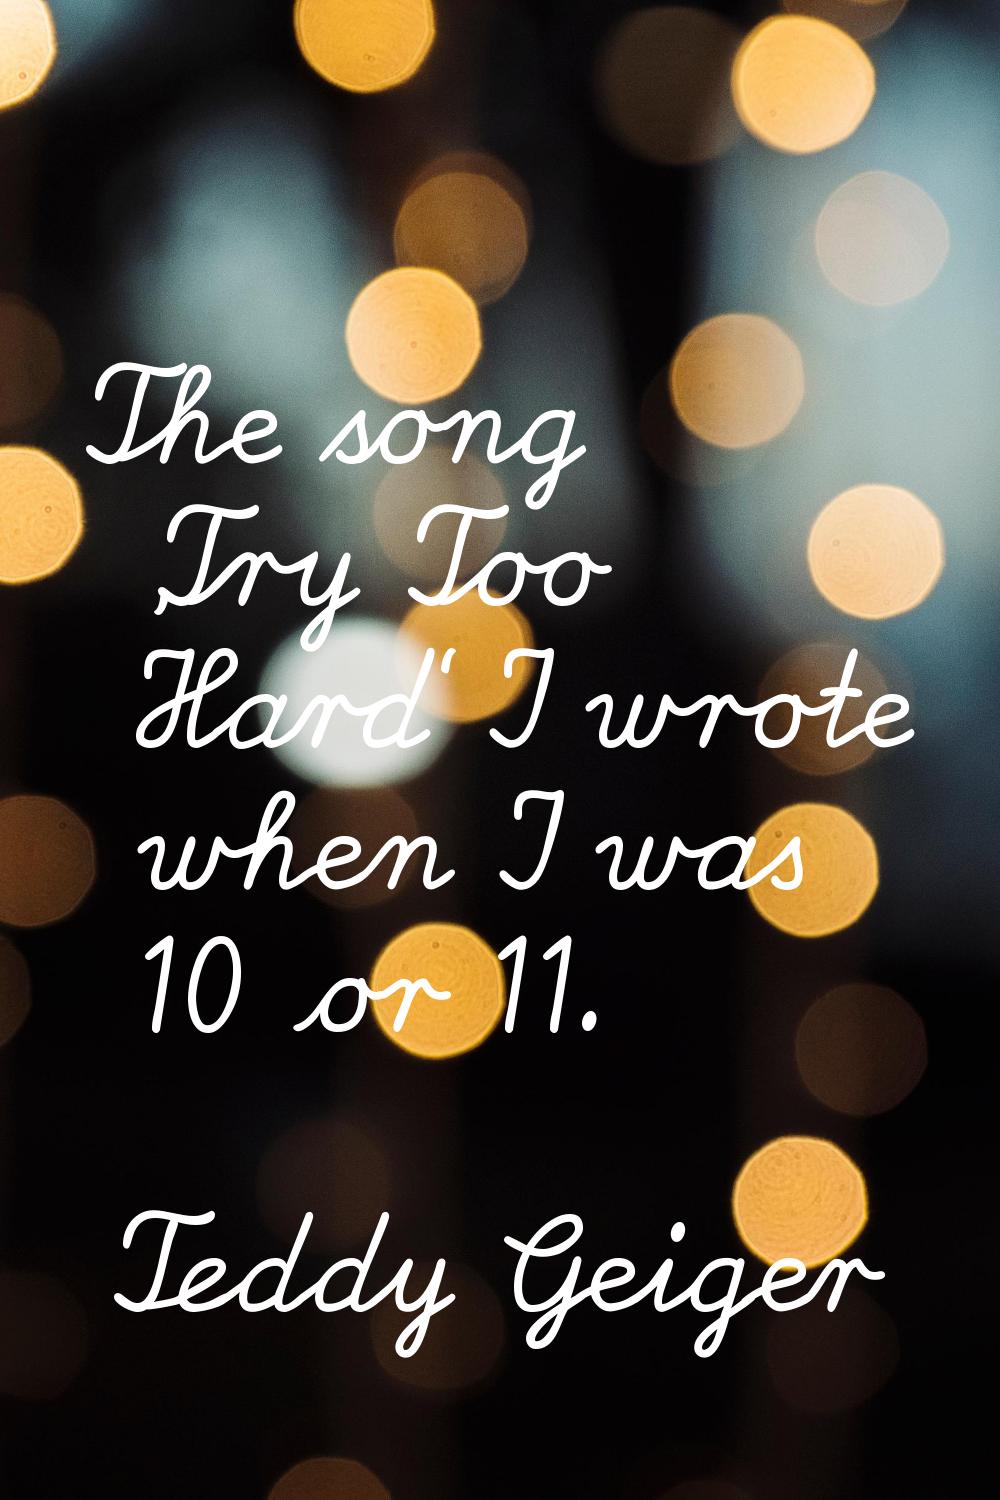 The song 'Try Too Hard' I wrote when I was 10 or 11.